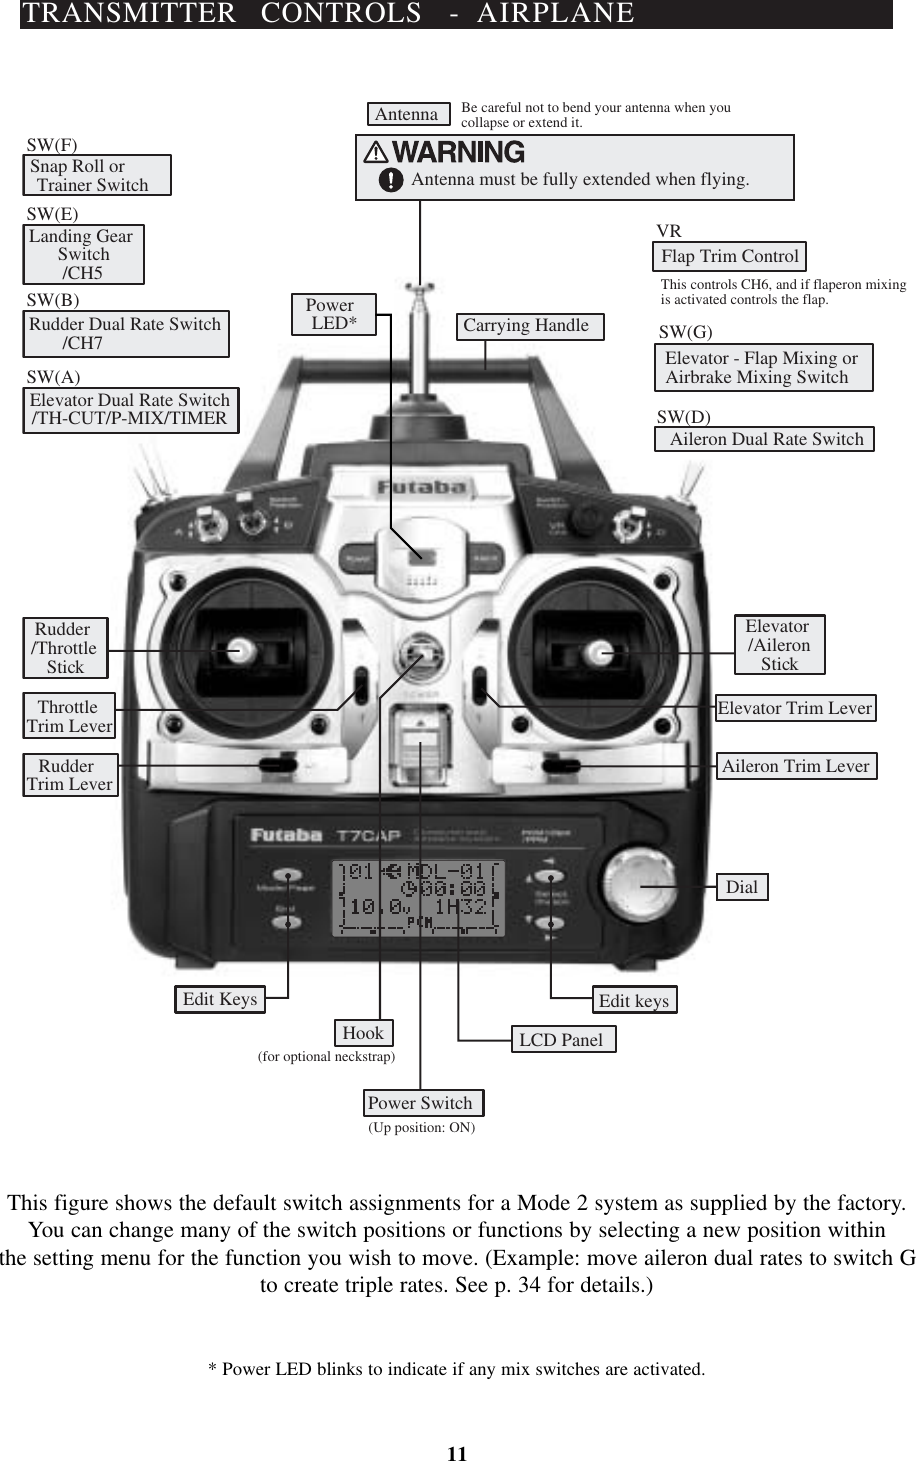 TRANSMITTER CONTROLS - AIRPLANESW(B)VRSW(A)SW(F)SW(E)SW(D)SW(G)This controls CH6, and if flaperon mixingis activated controls the flap.Flap Trim ControlRudder Dual Rate SwitchElevator Dual Rate Switch/TH-CUT/P-MIX/TIMERSnap Roll orTrainer SwitchLanding GearSwitch/CH5/CH7Rudder/ThrottleStickPowerLED*ThrottleTrim LeverRudderTrim LeverLCD PanelPower Switch(Up position: ON)Hook(for optional neckstrap)Edit Keys Edit keysAileron Trim LeverDialElevator Trim LeverElevator/AileronStickAileron Dual Rate SwitchElevator - Flap Mixing orAirbrake Mixing SwitchCarrying HandleAntennaAntenna must be fully extended when flying.Be careful not to bend your antenna when youcollapse or extend it.11This figure shows the default switch assignments for a Mode 2 system as supplied by the factory.You can change many of the switch positions or functions by selecting a new position withinthe setting menu for the function you wish to move. (Example: move aileron dual rates to switch Gto create triple rates. See p. 34 for details.)*Power LED blinks to indicate if any mix switches are activated.